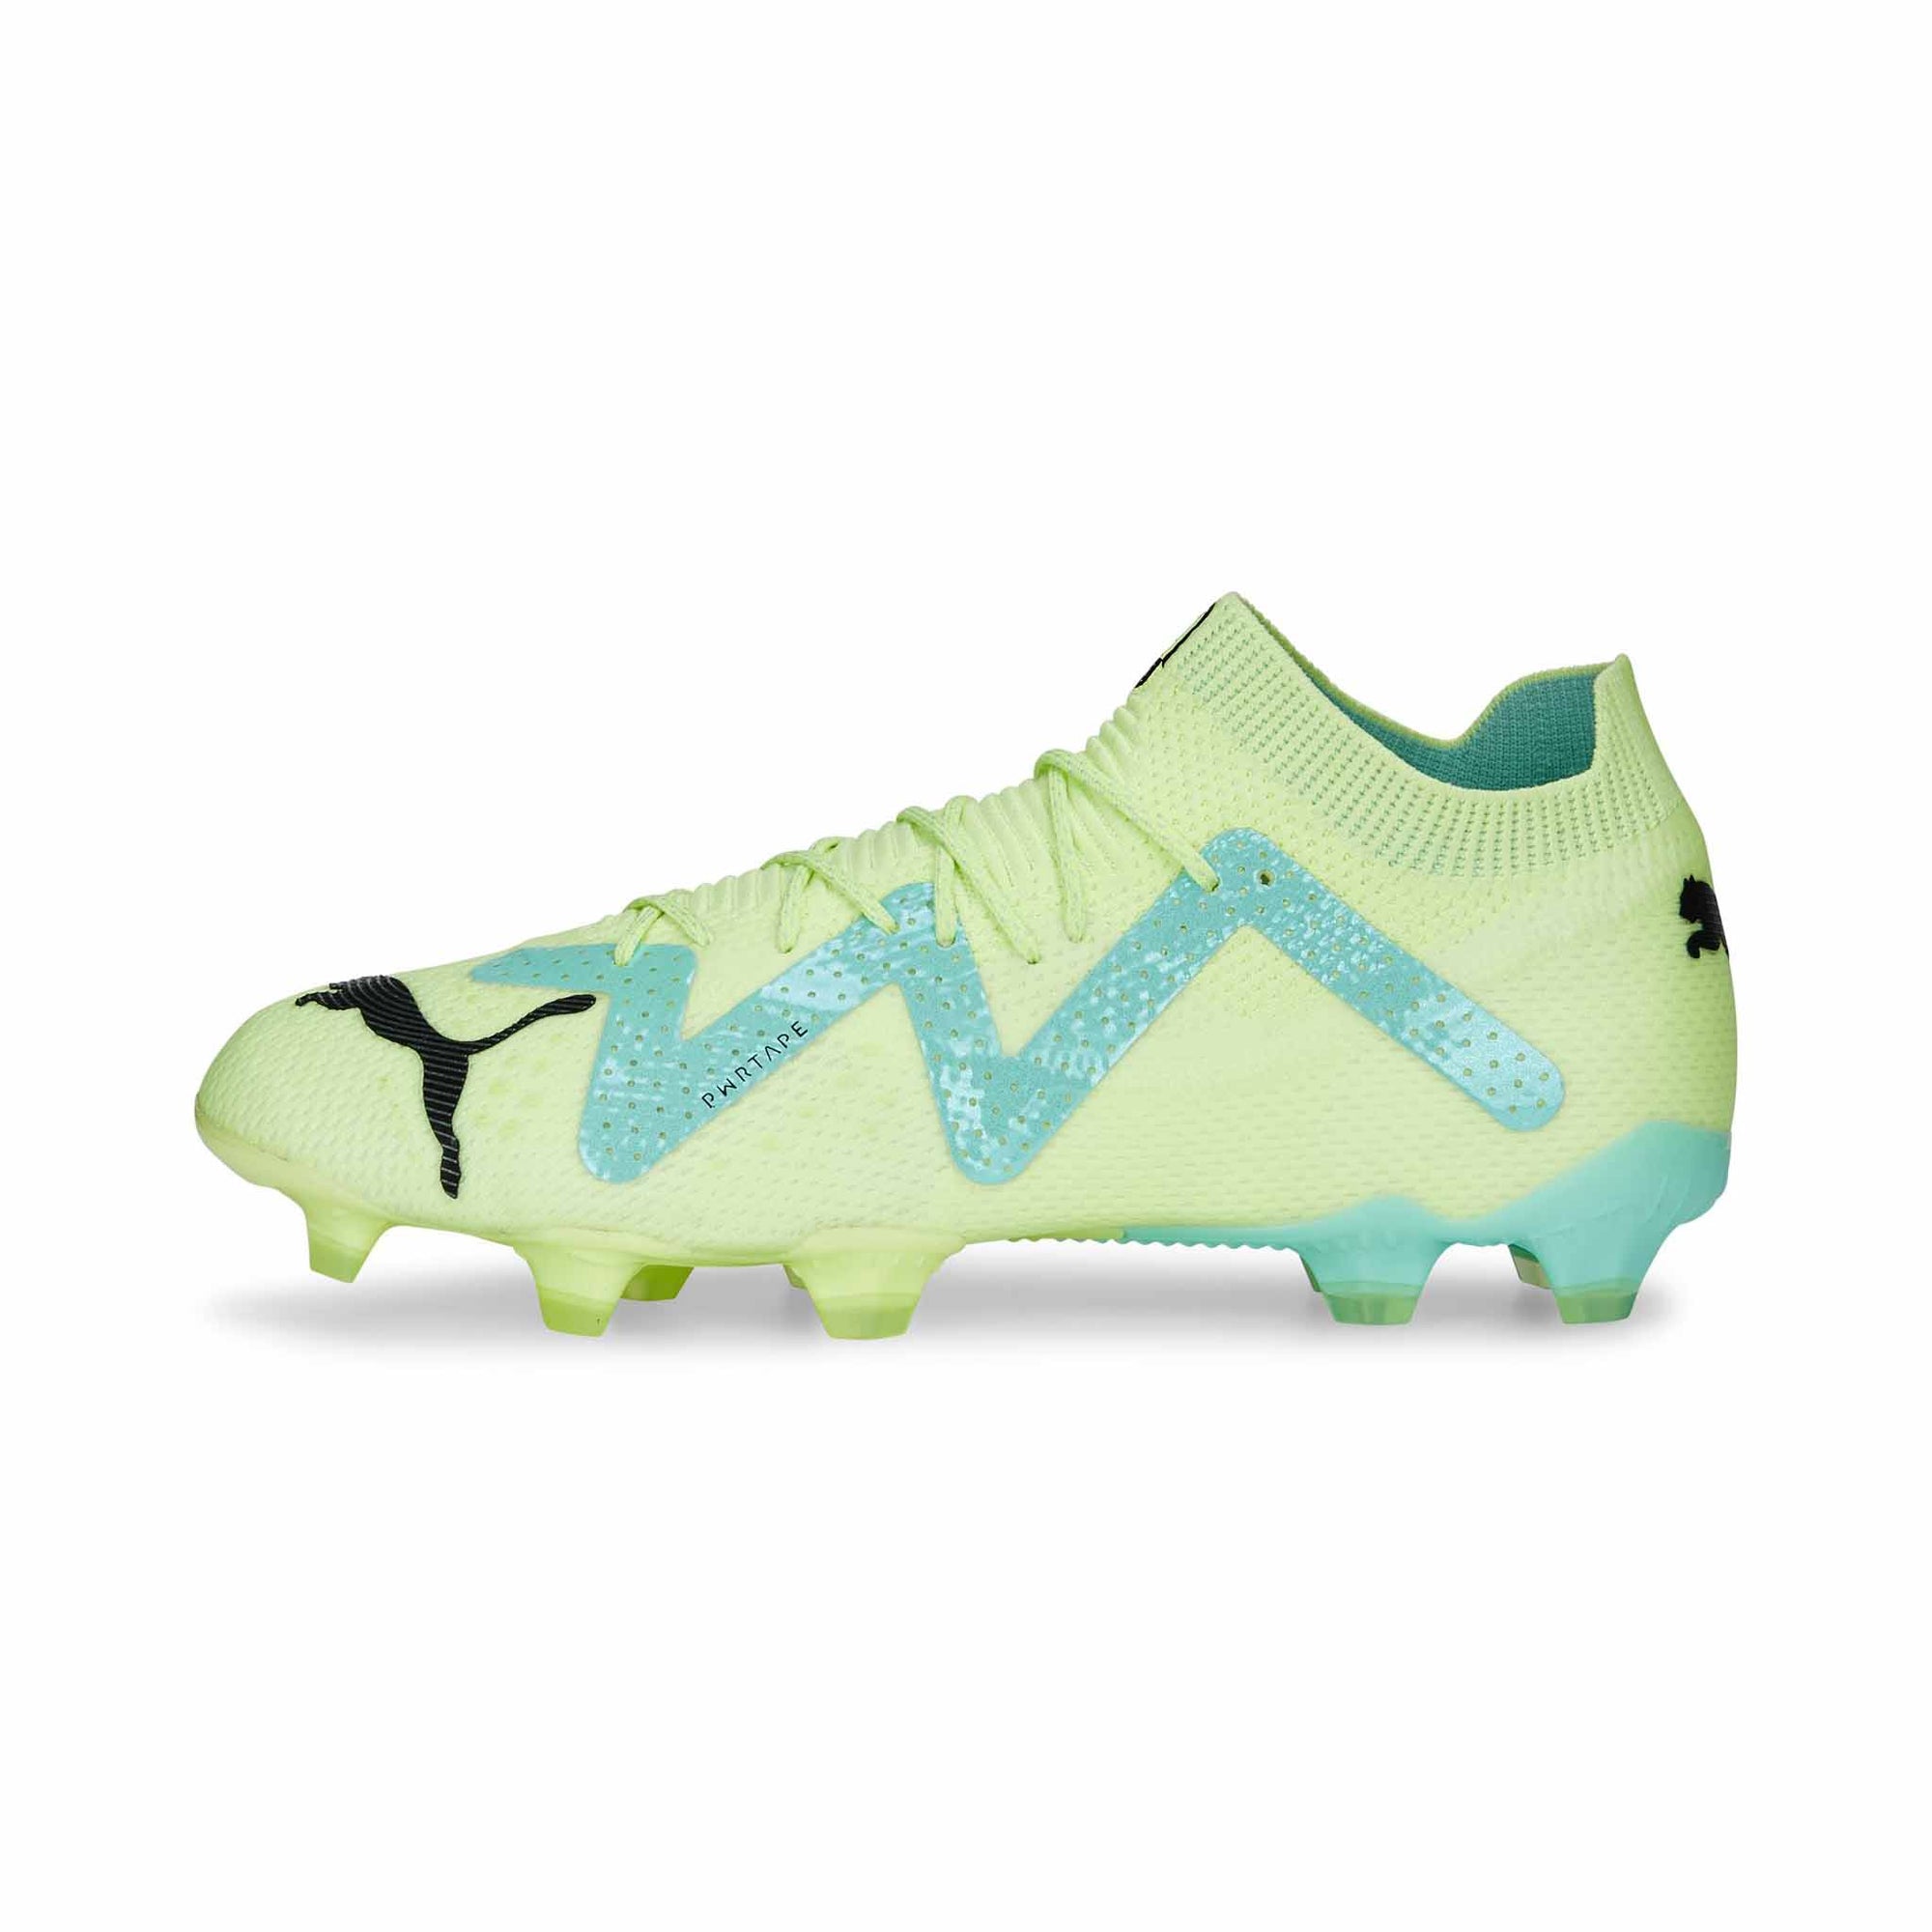 Puma Future Ultimate FG/AG chaussures de soccer a crampons - Fast Yellow / Puma Black / Electric Peppermint